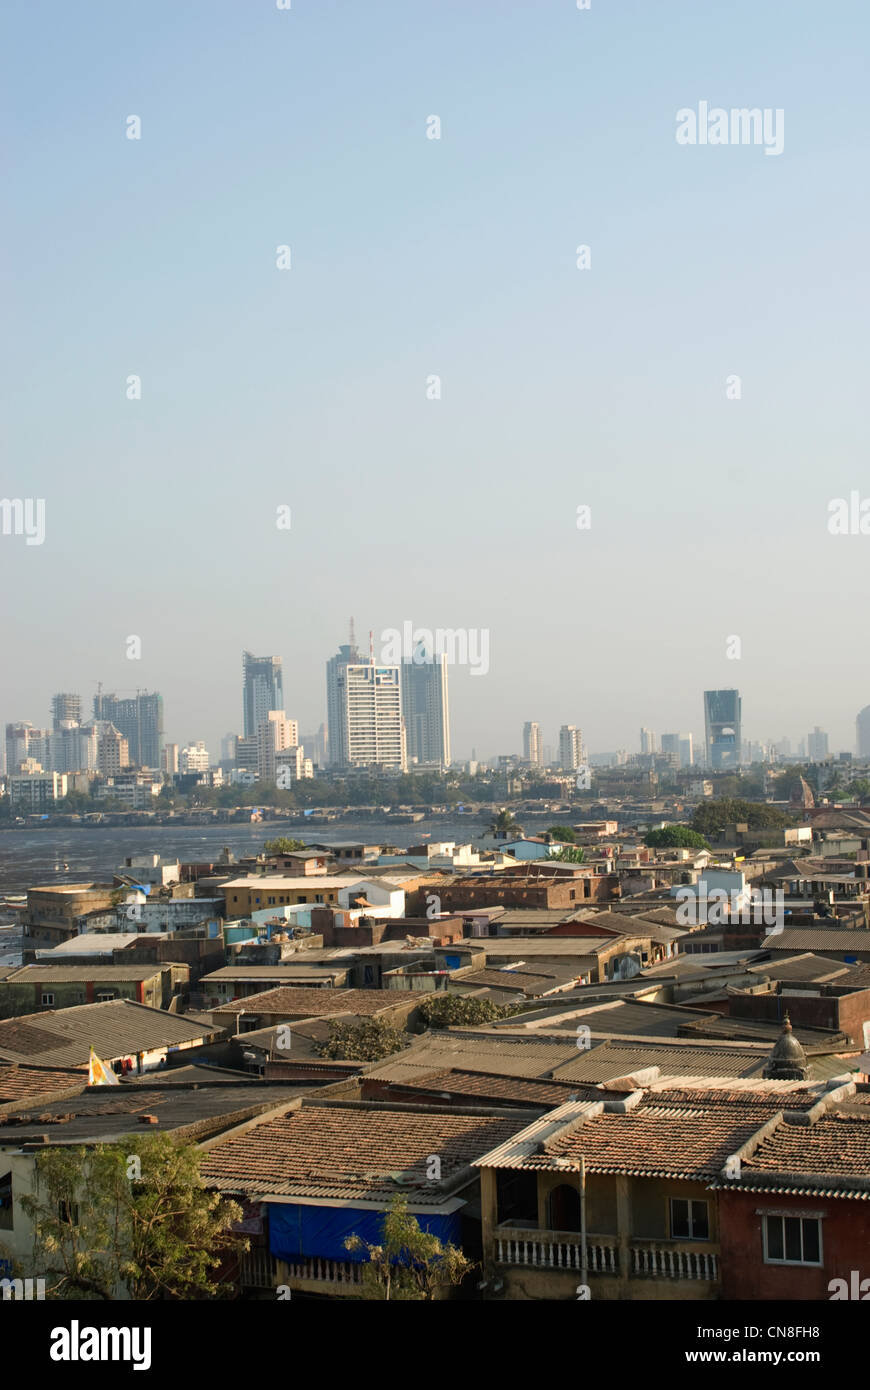 Urbanization Contrast - Slums in the foreground and high rises behind - Mumbai, India Stock Photo